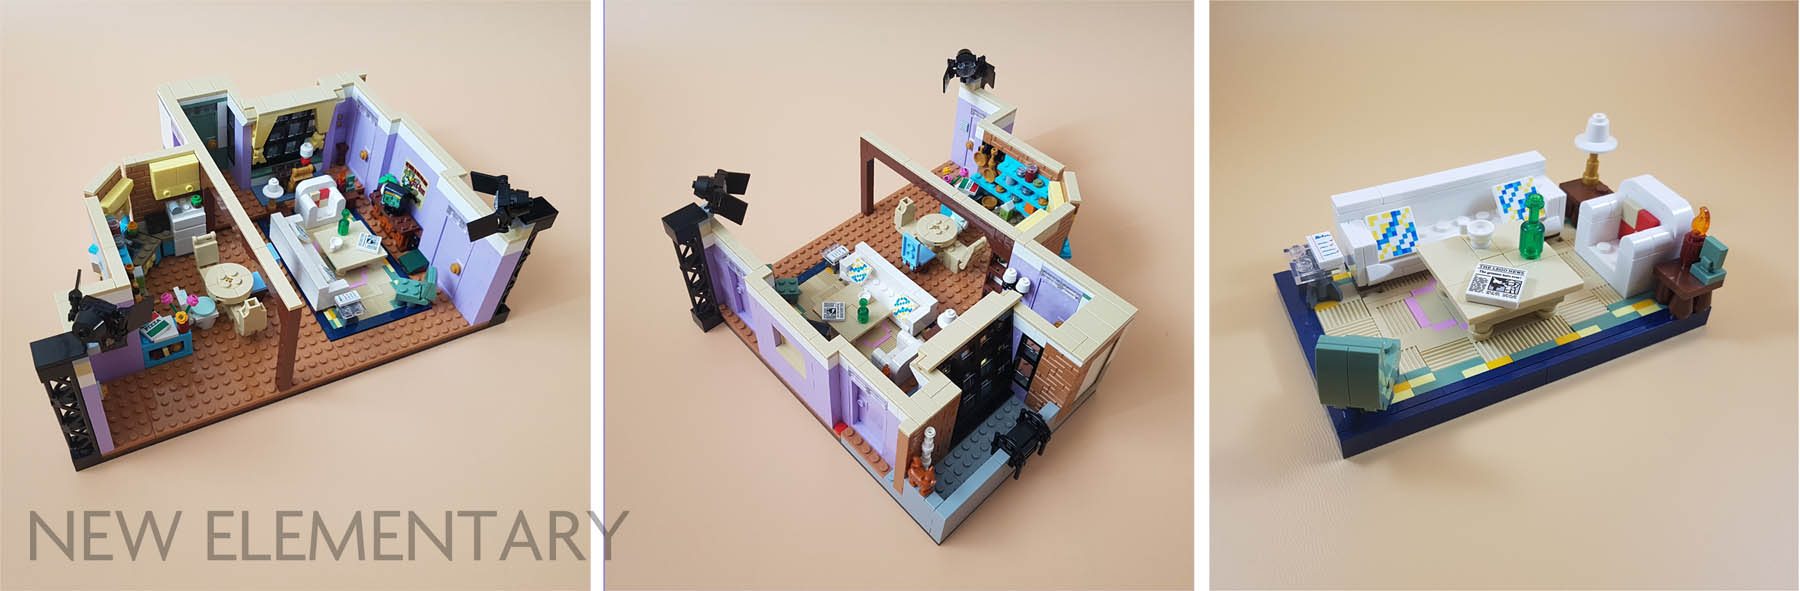 Review: LEGO 10292 The Friends Apartments (2021) - Jay's Brick Blog